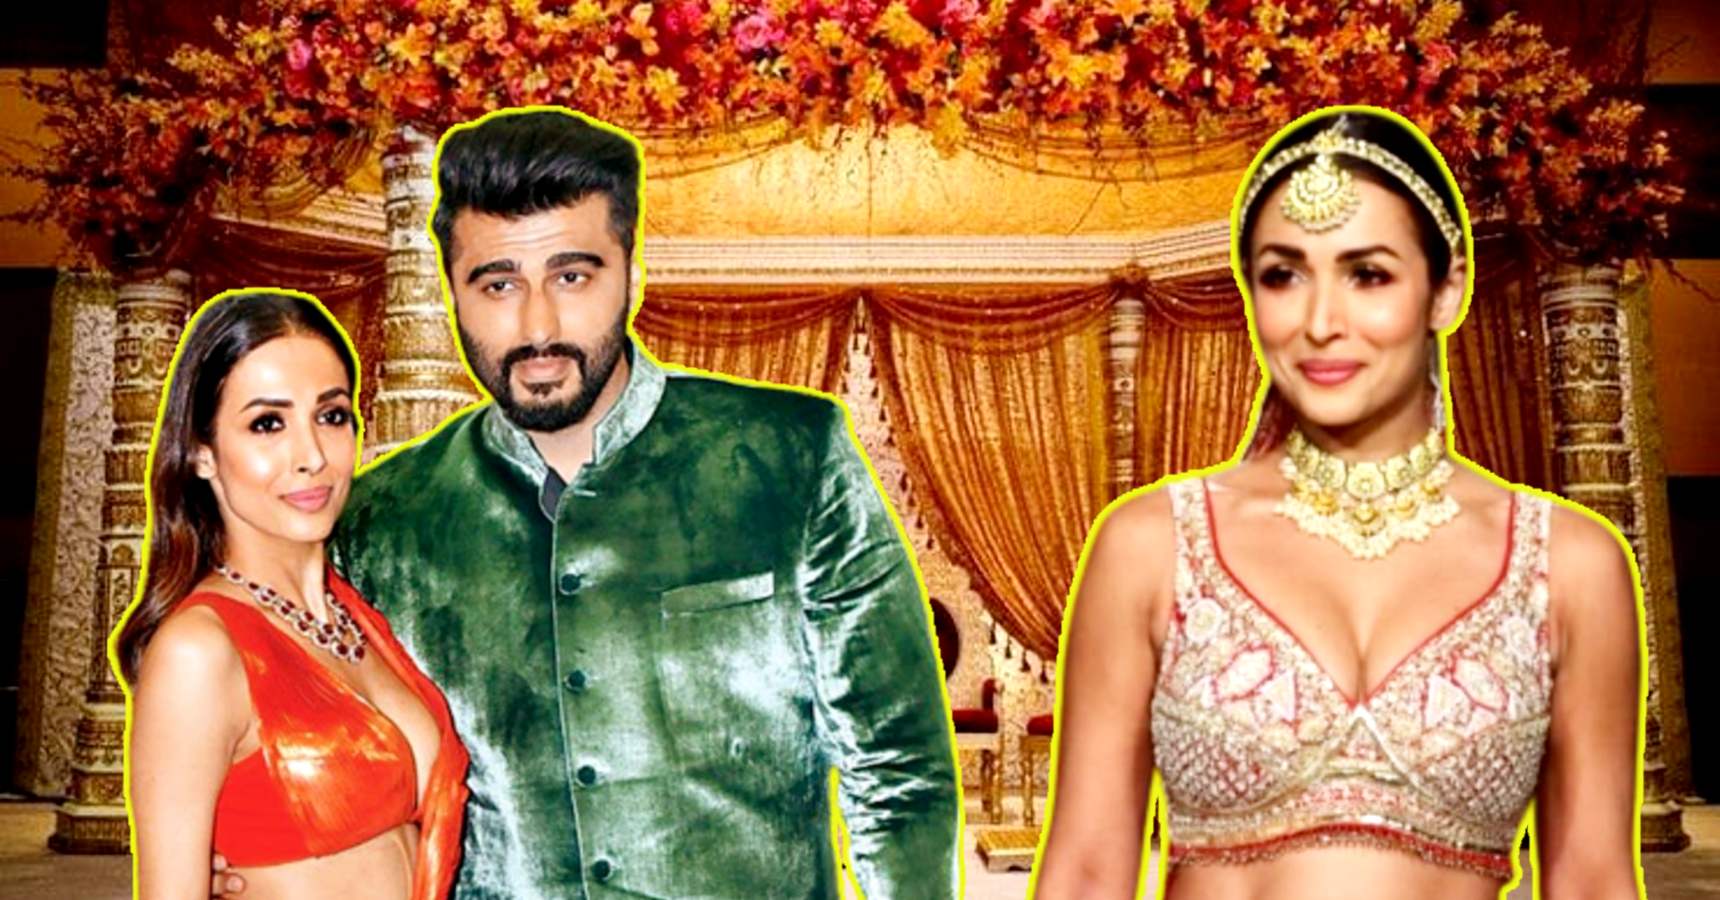 Bollywood actress Malaika Arora talks about marriying Arjun Kapoor, says we are ready for it